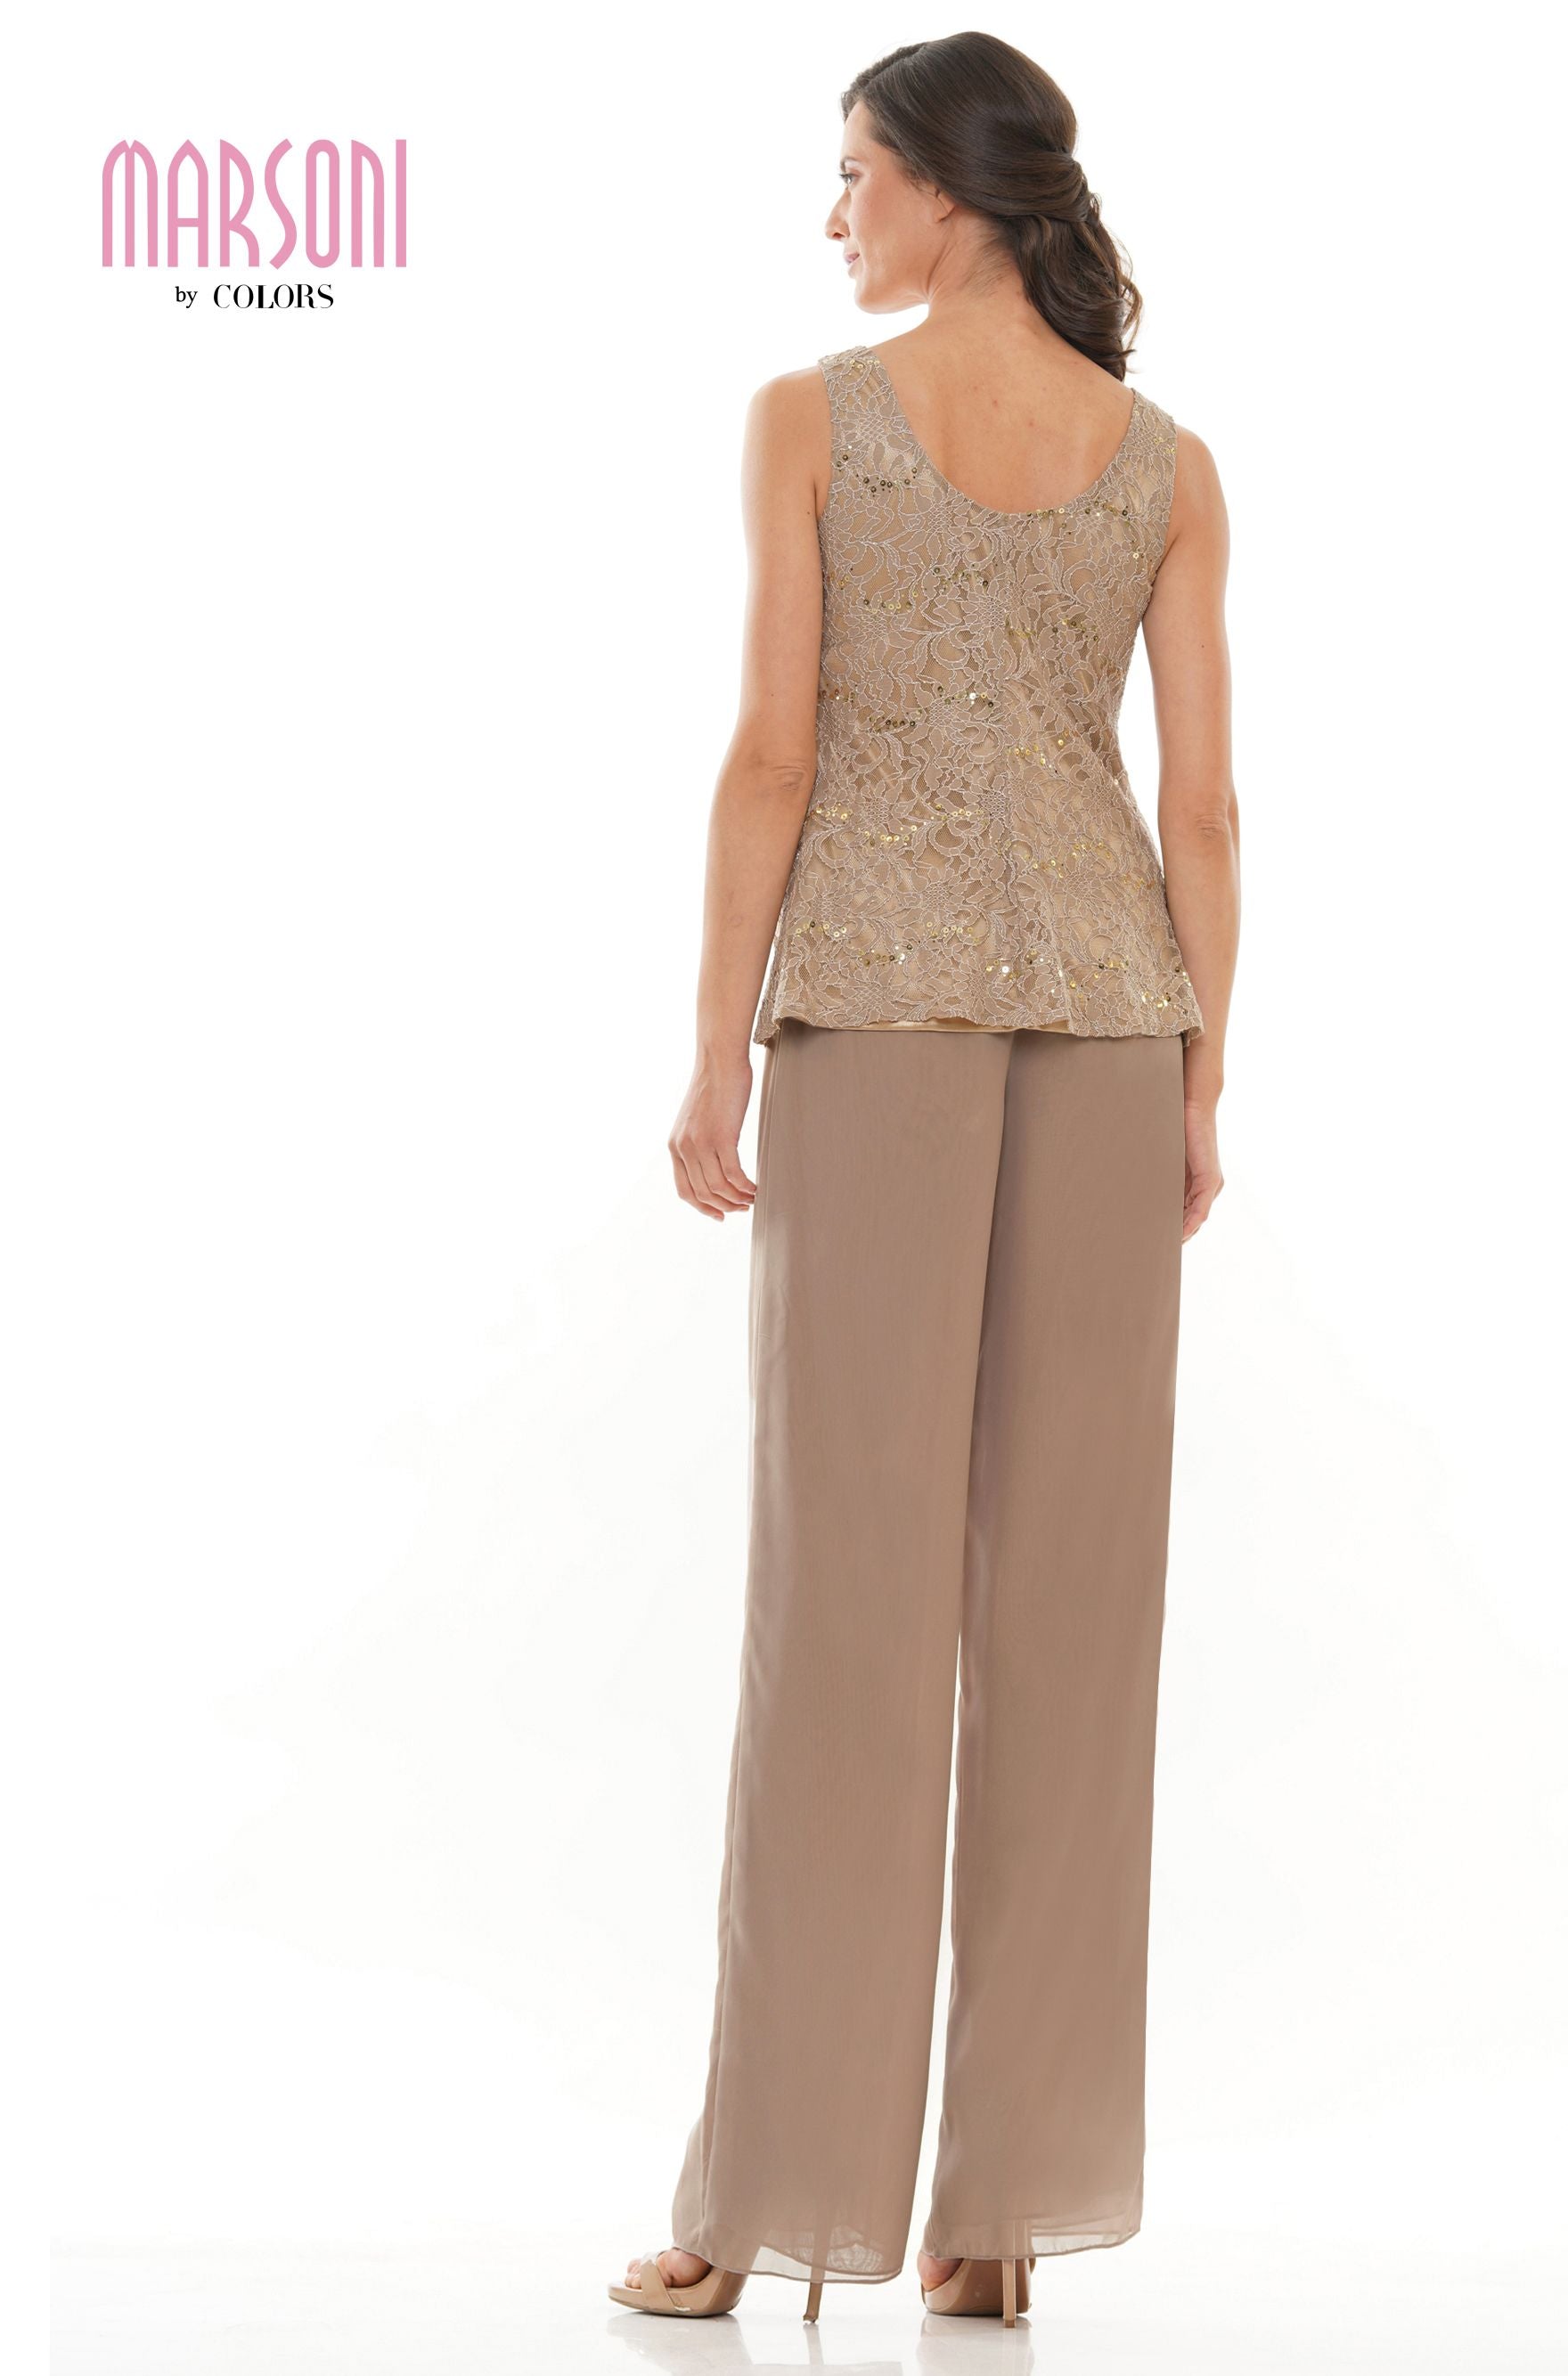 Clearance Sale Marsoni by Colors -M305 Pantsuit With Stretch Lace Jacket